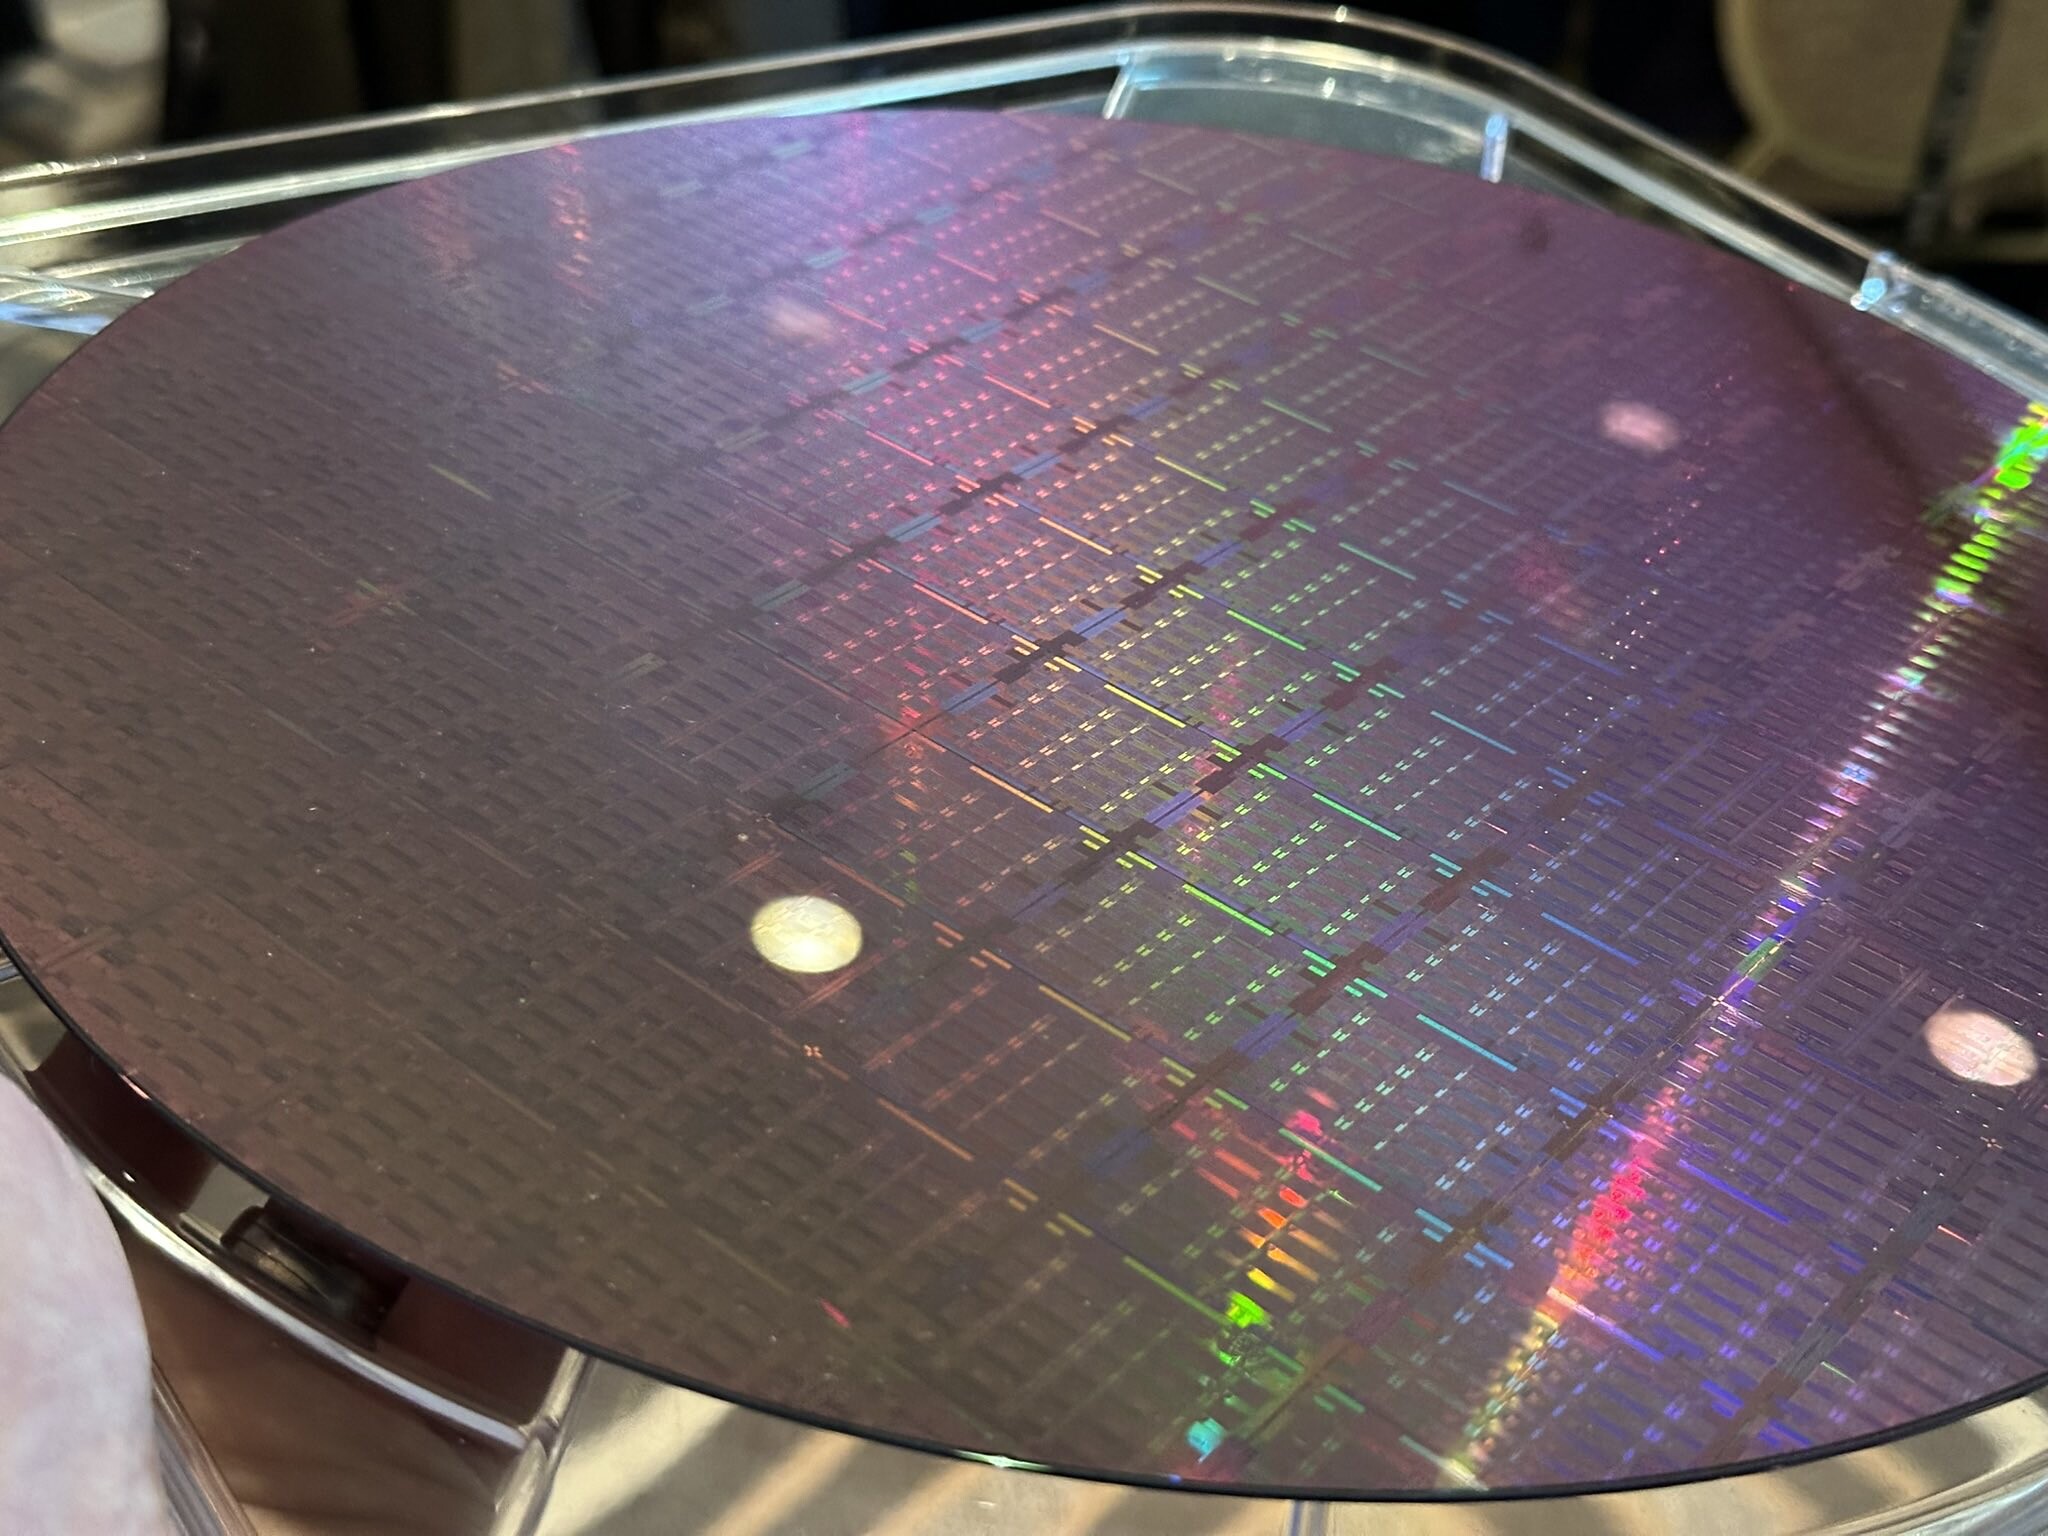 The first silicon built on Intel 3 is shown in the image of the Intel Xeon 